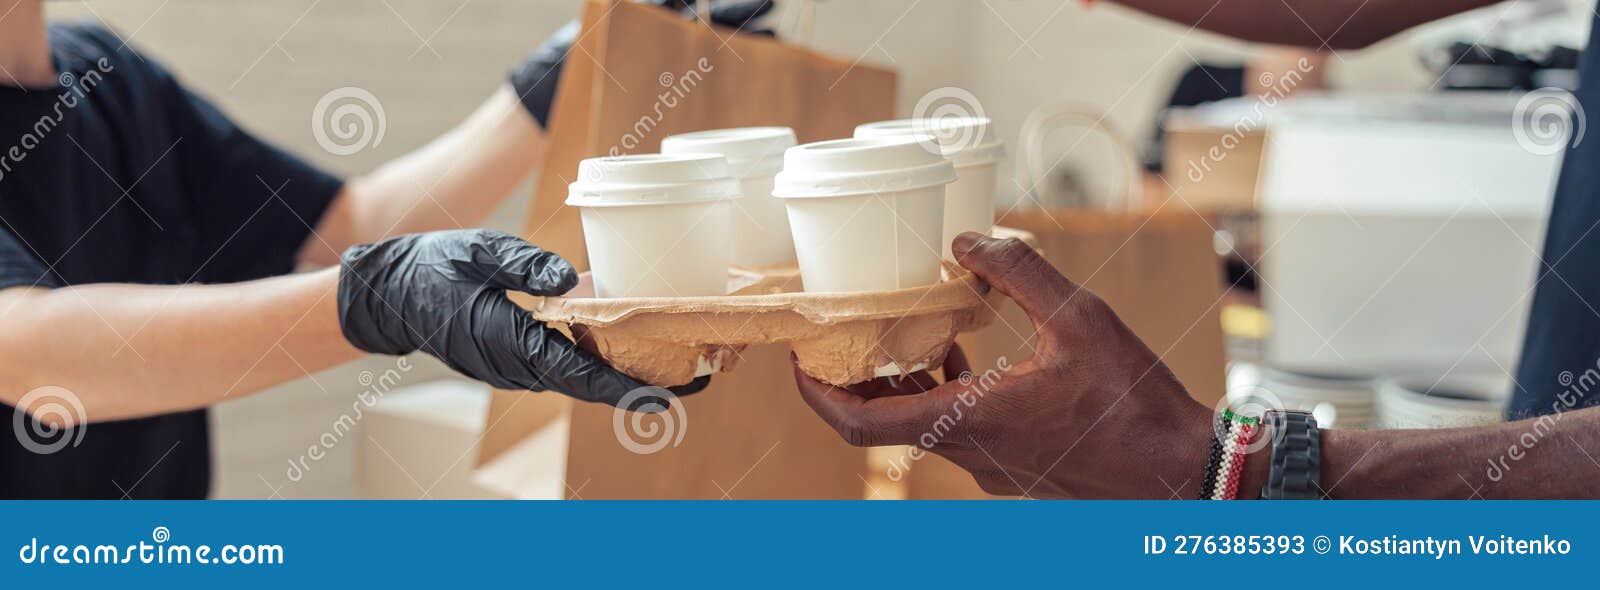 woman and negro holding grocery bags and cups